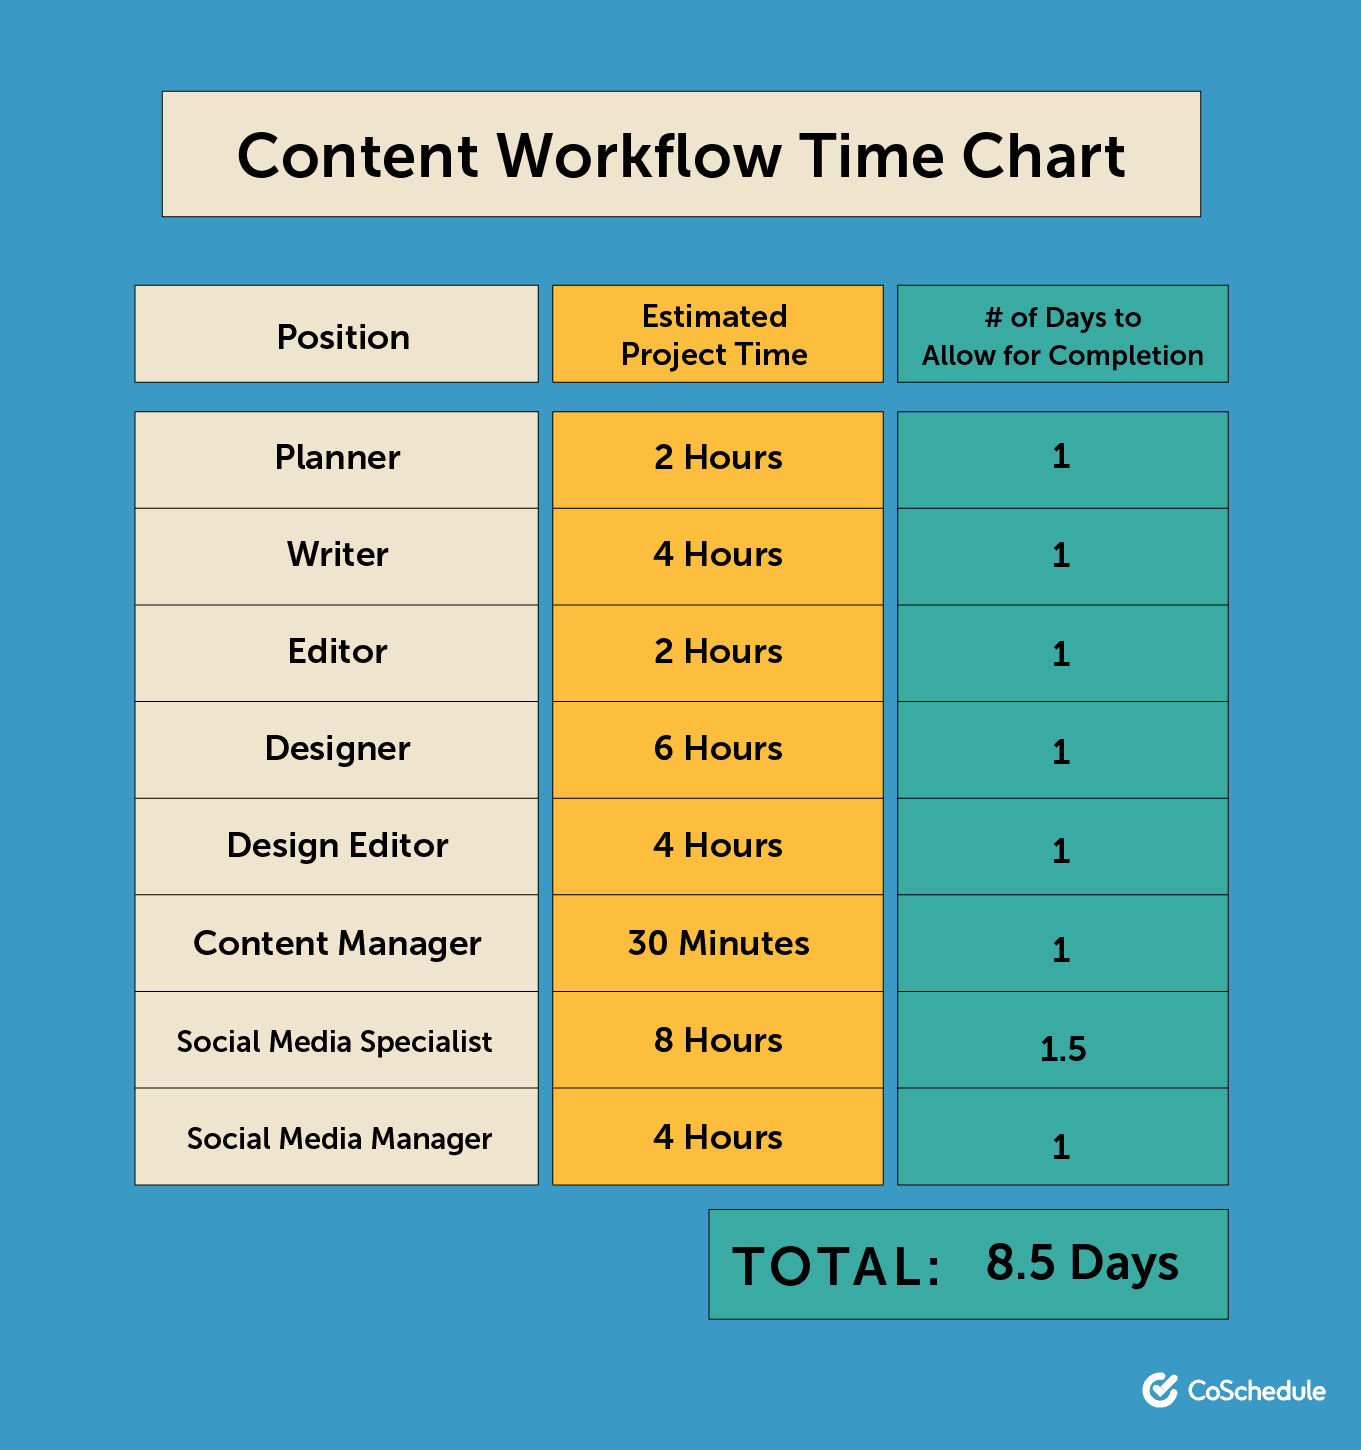 Content workflow time chart